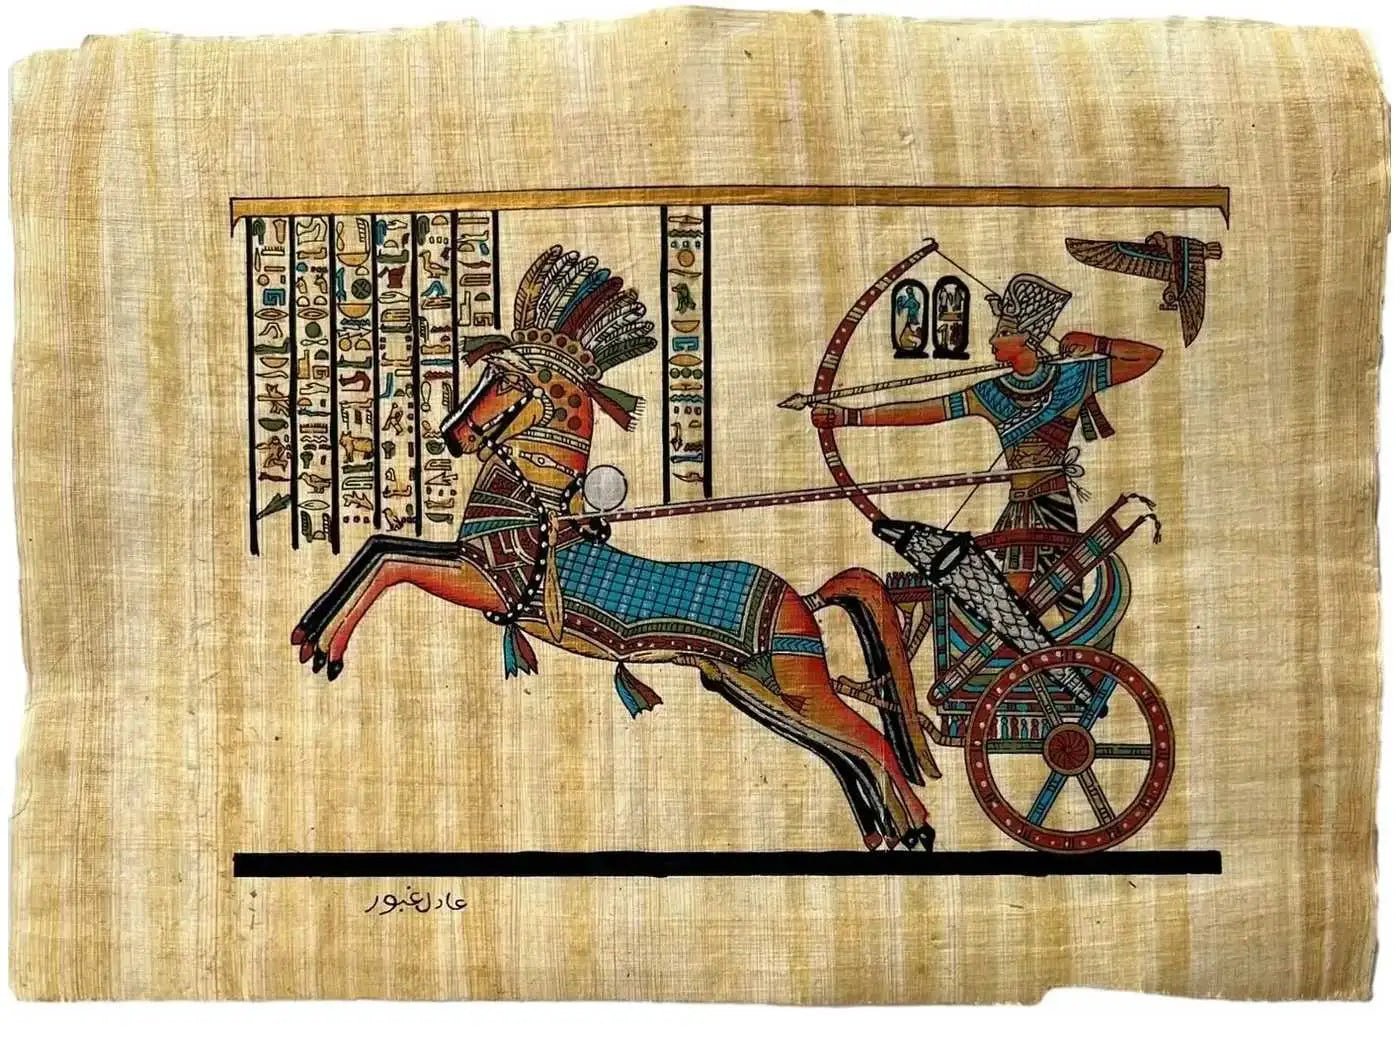 Pharaoh Ramses II on Chariot Battle of Nubia - Papyrus Egyptian Hand-Made Papyrus Painting - Egypt Decor